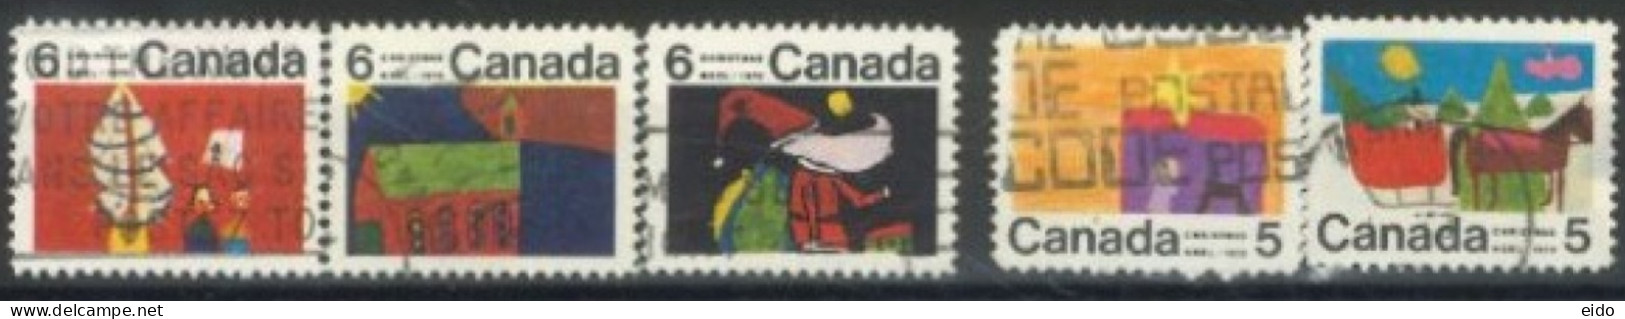 CANADA - 1970, CHRISTMAS STAMPS SET OF 5, USED. - Gebraucht